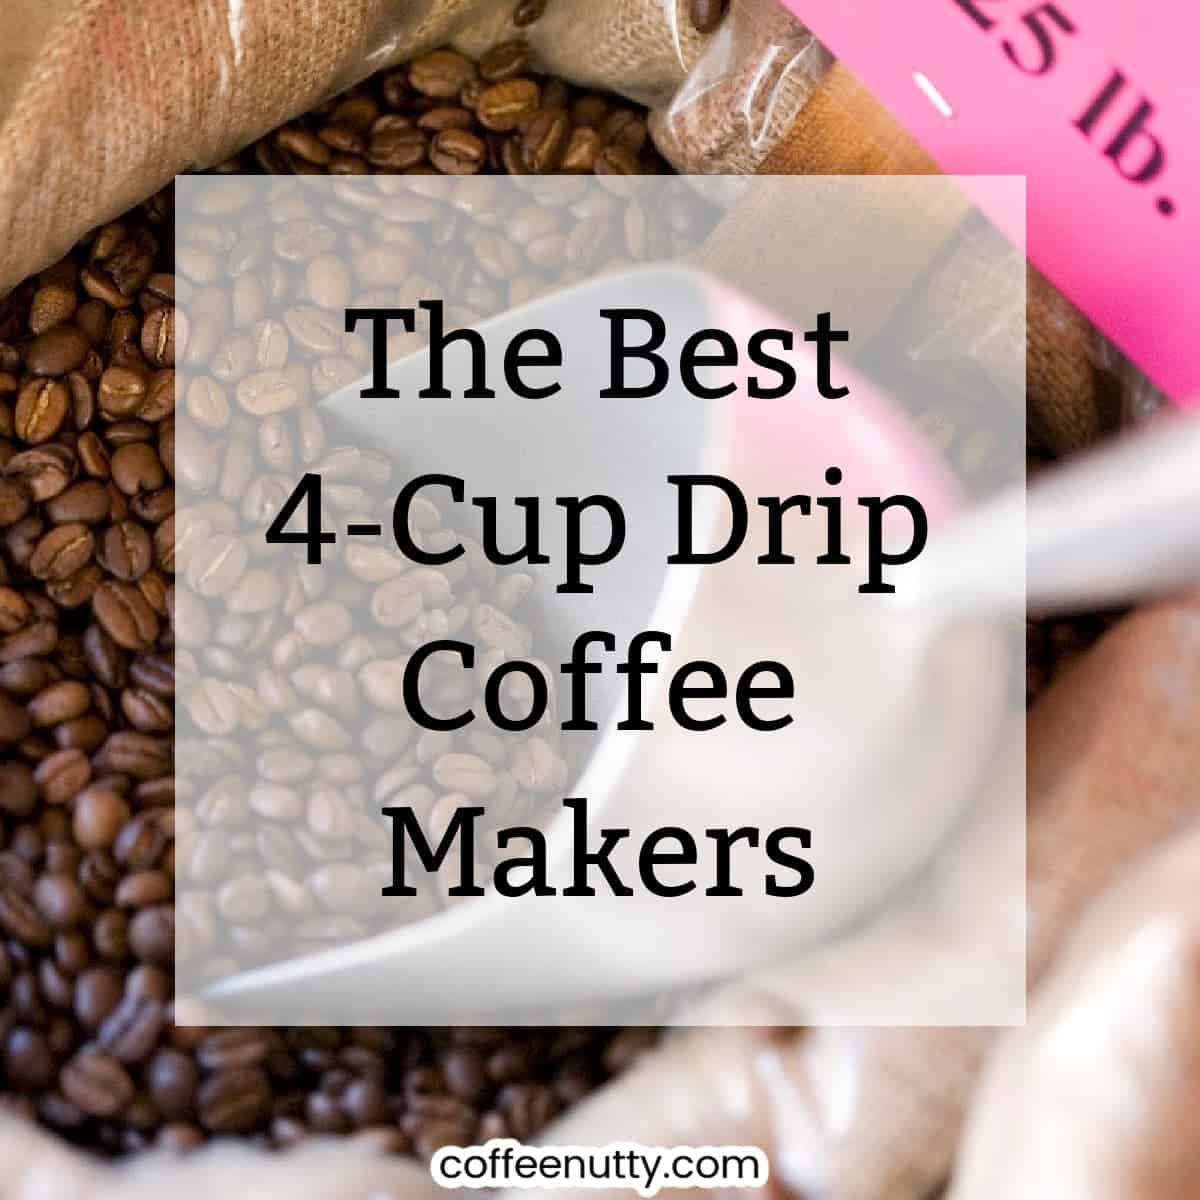 Coffee in bag with text over reading "the best 4-cup drip coffee makers".